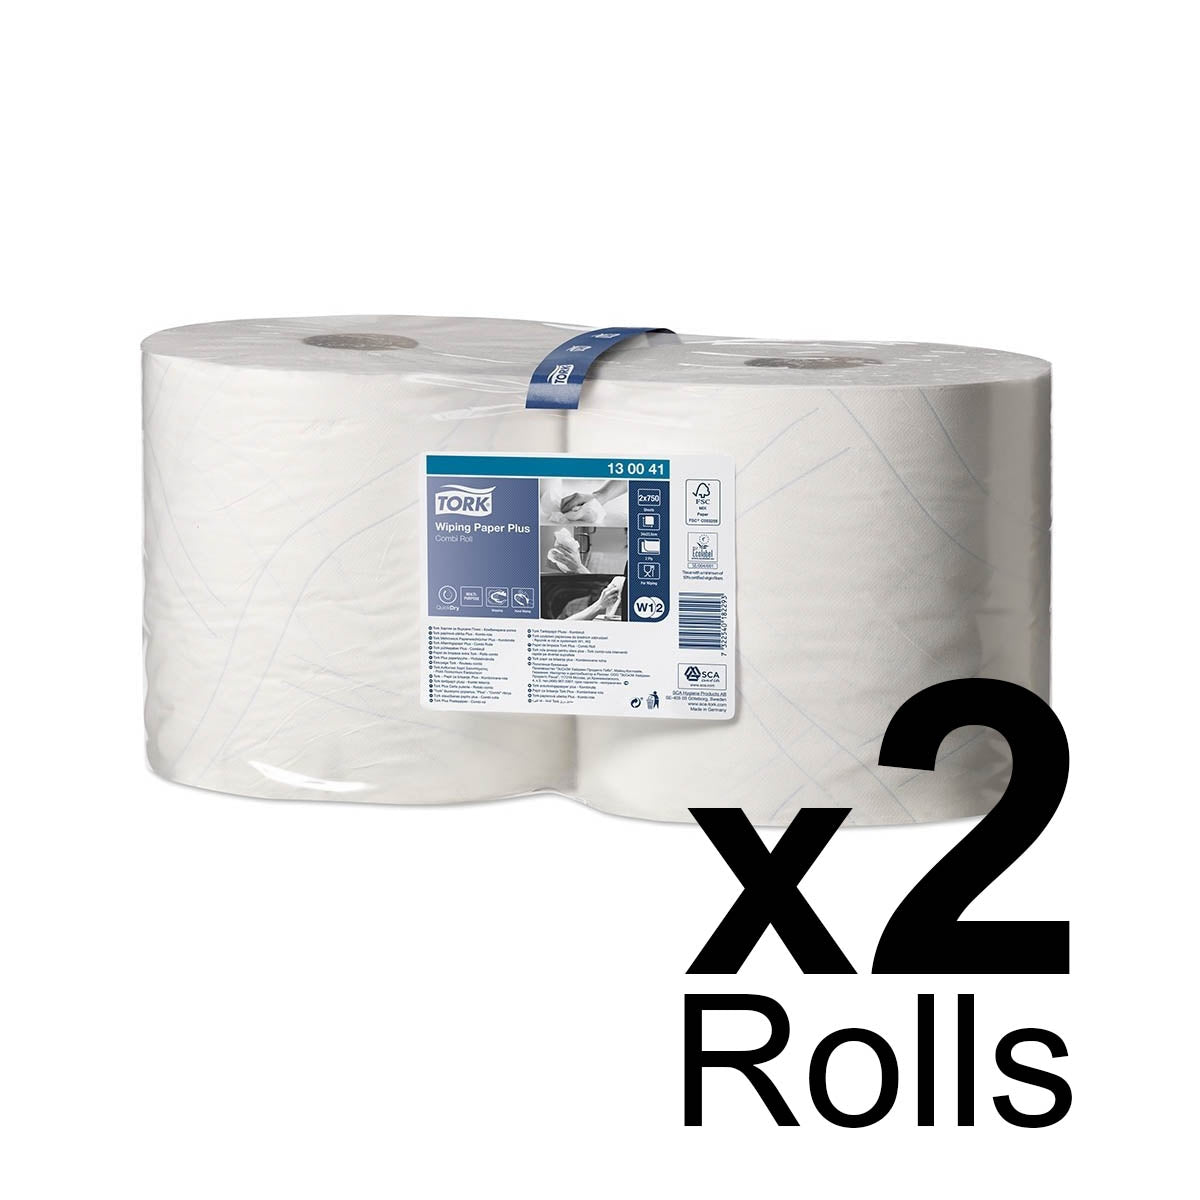 Tork Wiping Paper Plus White 2Ply - 130041 - 2 Rolls x 750 Sheets ...